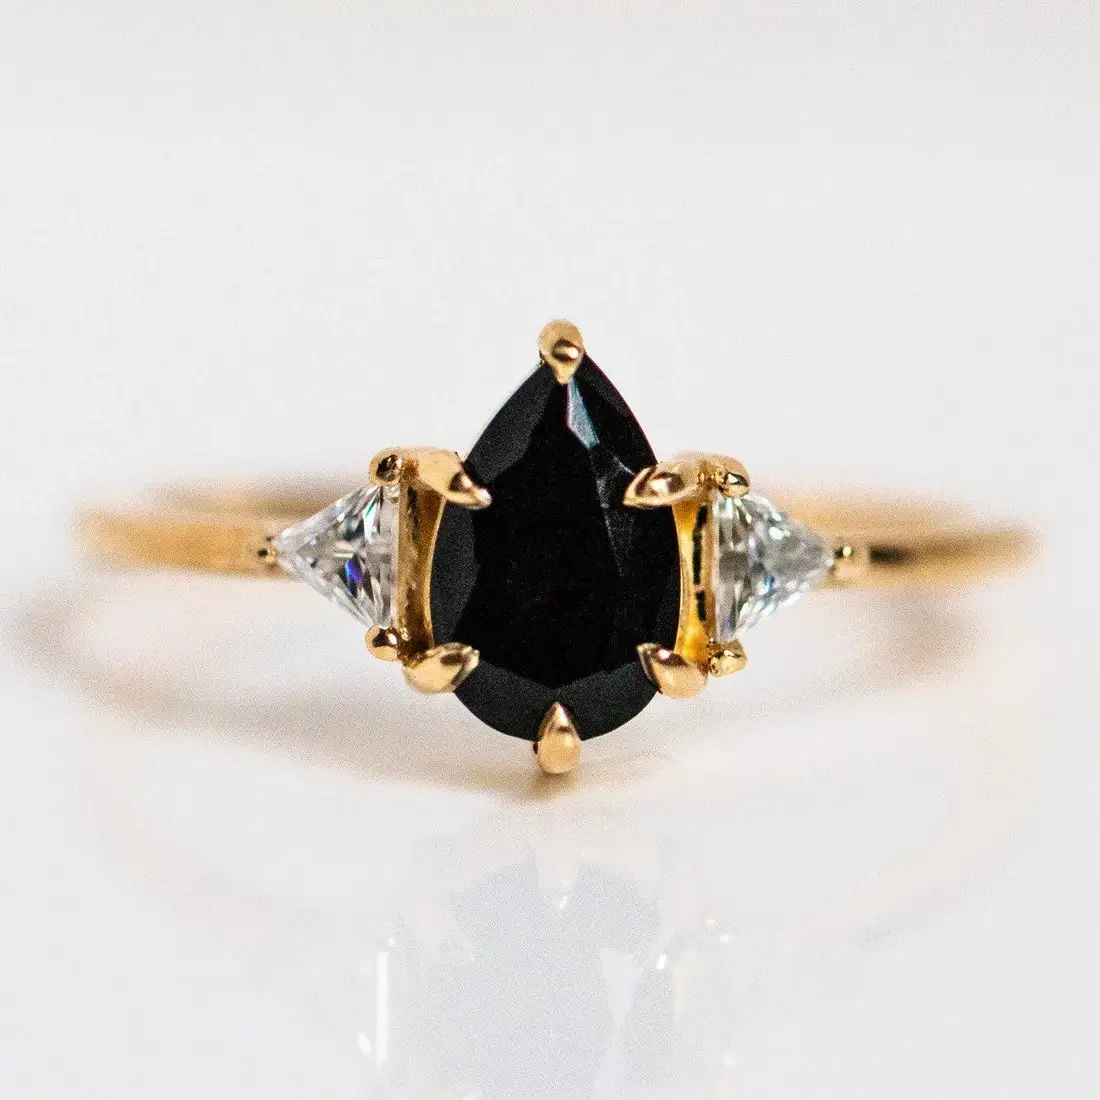 Black Onyx Pear Cut 925 Sterling Silver Gold Filled Minimalist Band Women Girl Engagement Ring Fine Silver Jewelry Wholesale